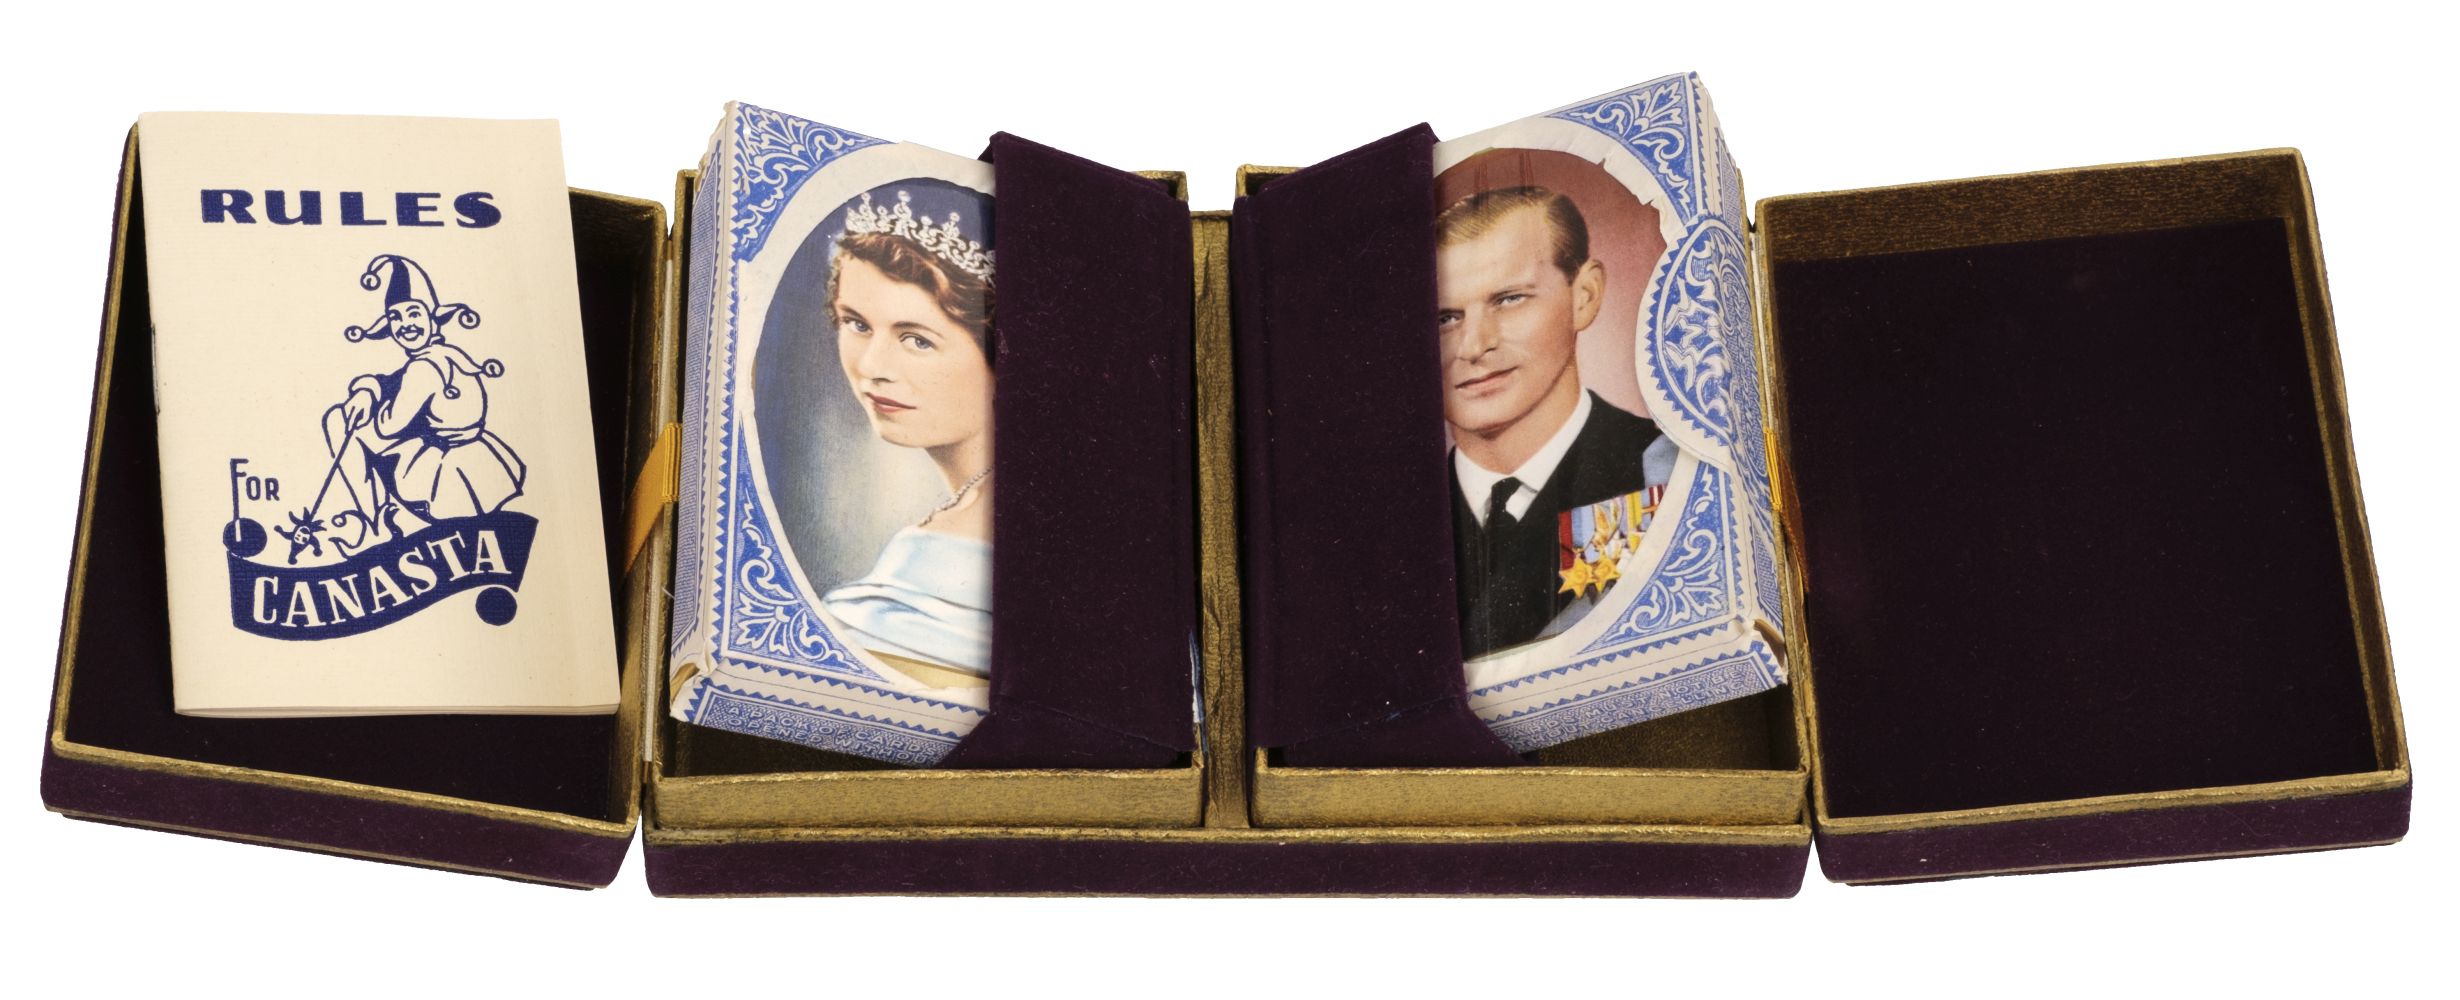 Royalty Playing Cards. Queen Elizabeth II Coronation commemorative playing cards, Alf Cooke, 1953